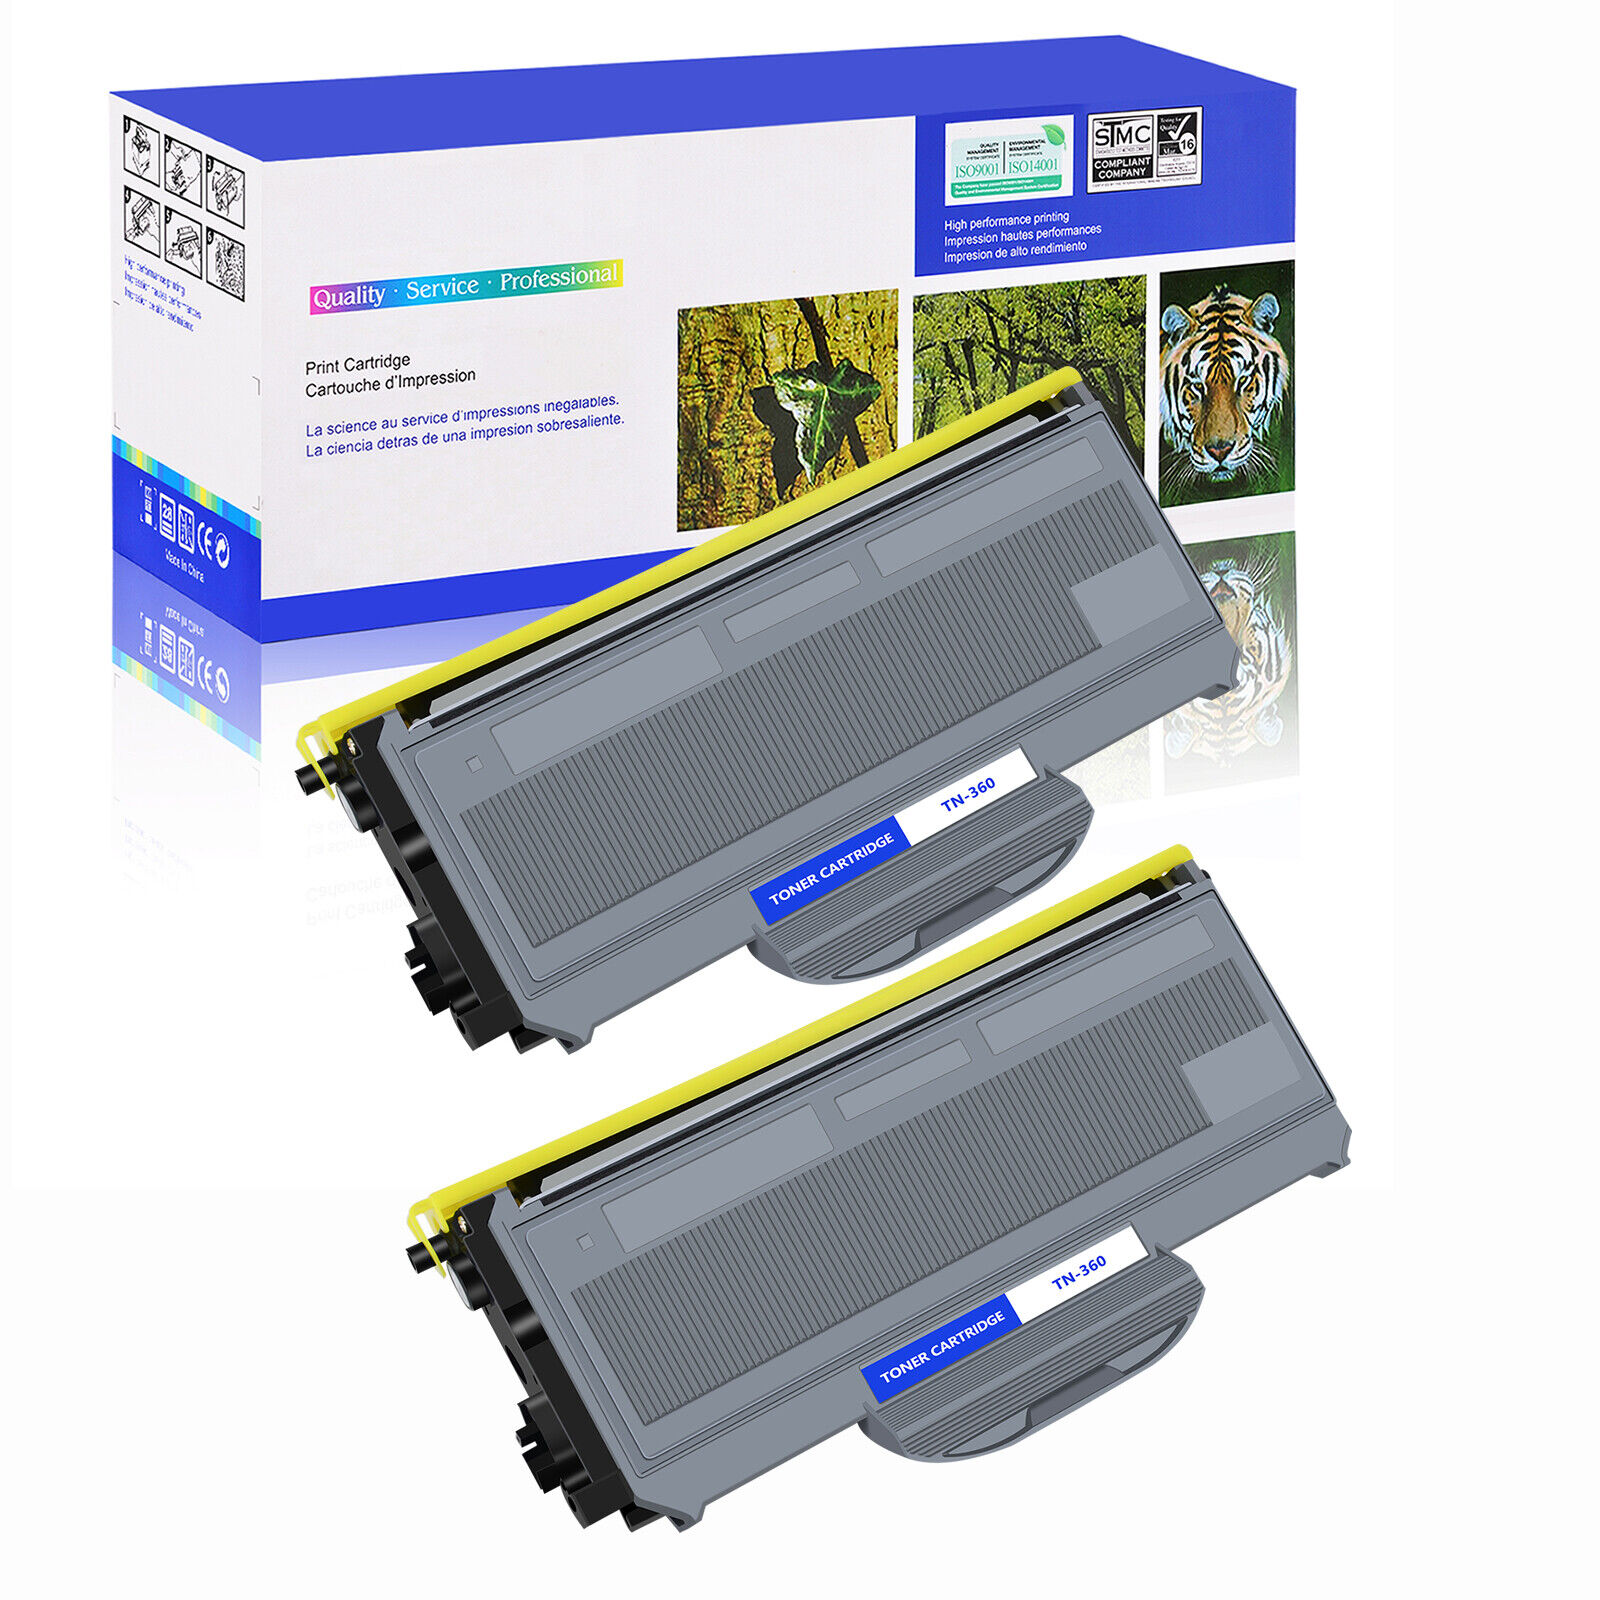 2 PACK - TN-360 TN360 Toner for Brother MFC-7840W MFC-7320 HL-2140 DCP-7040 